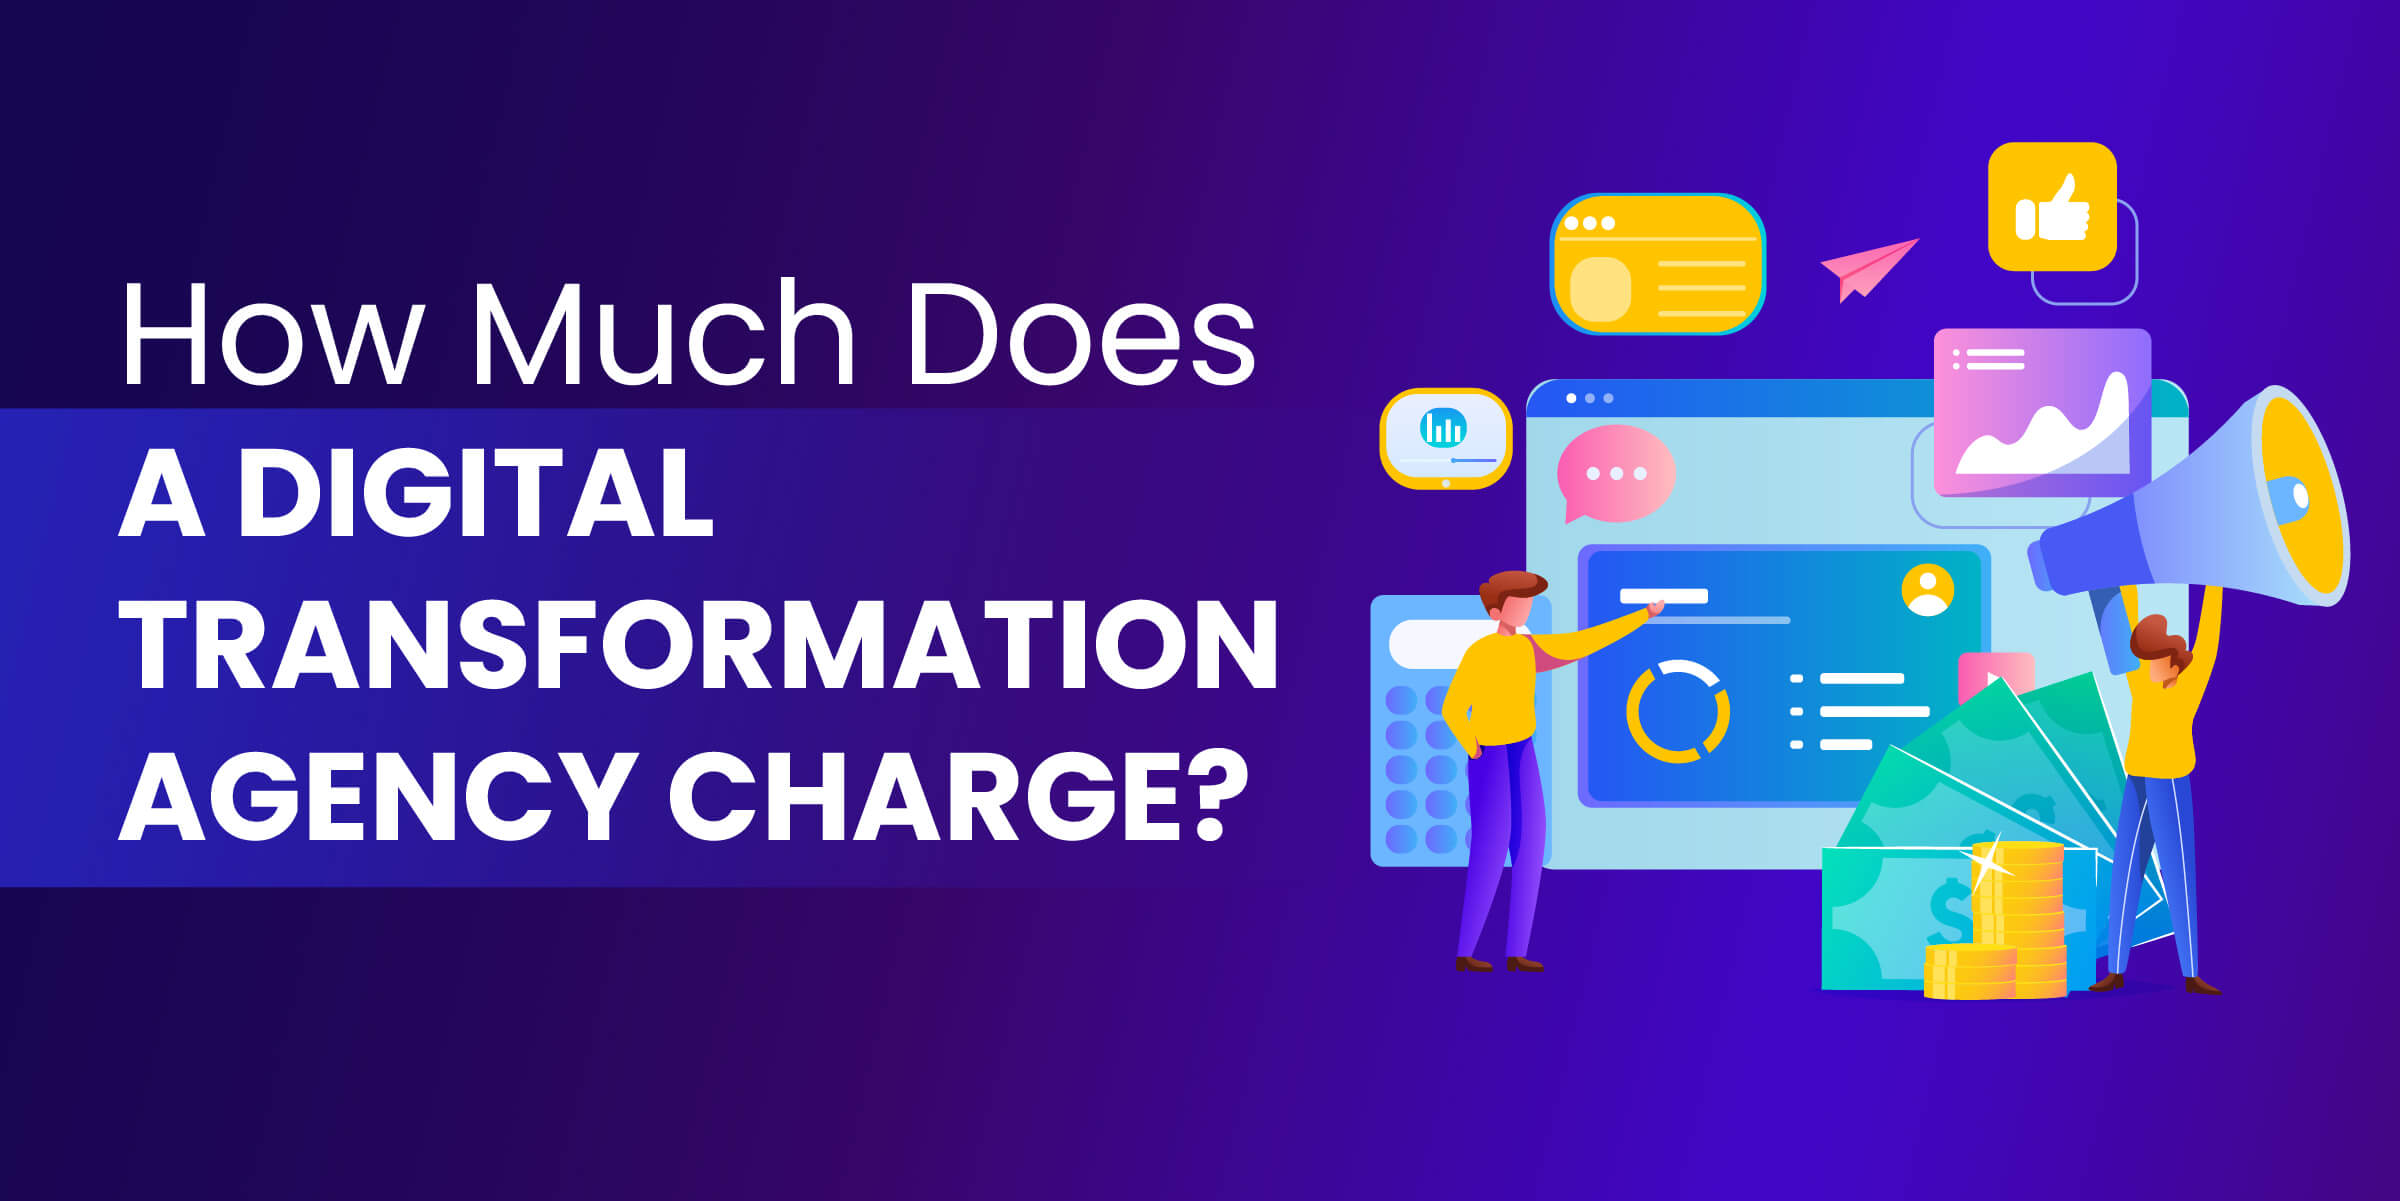 How Much Does a Digital Transformation Agency Charge